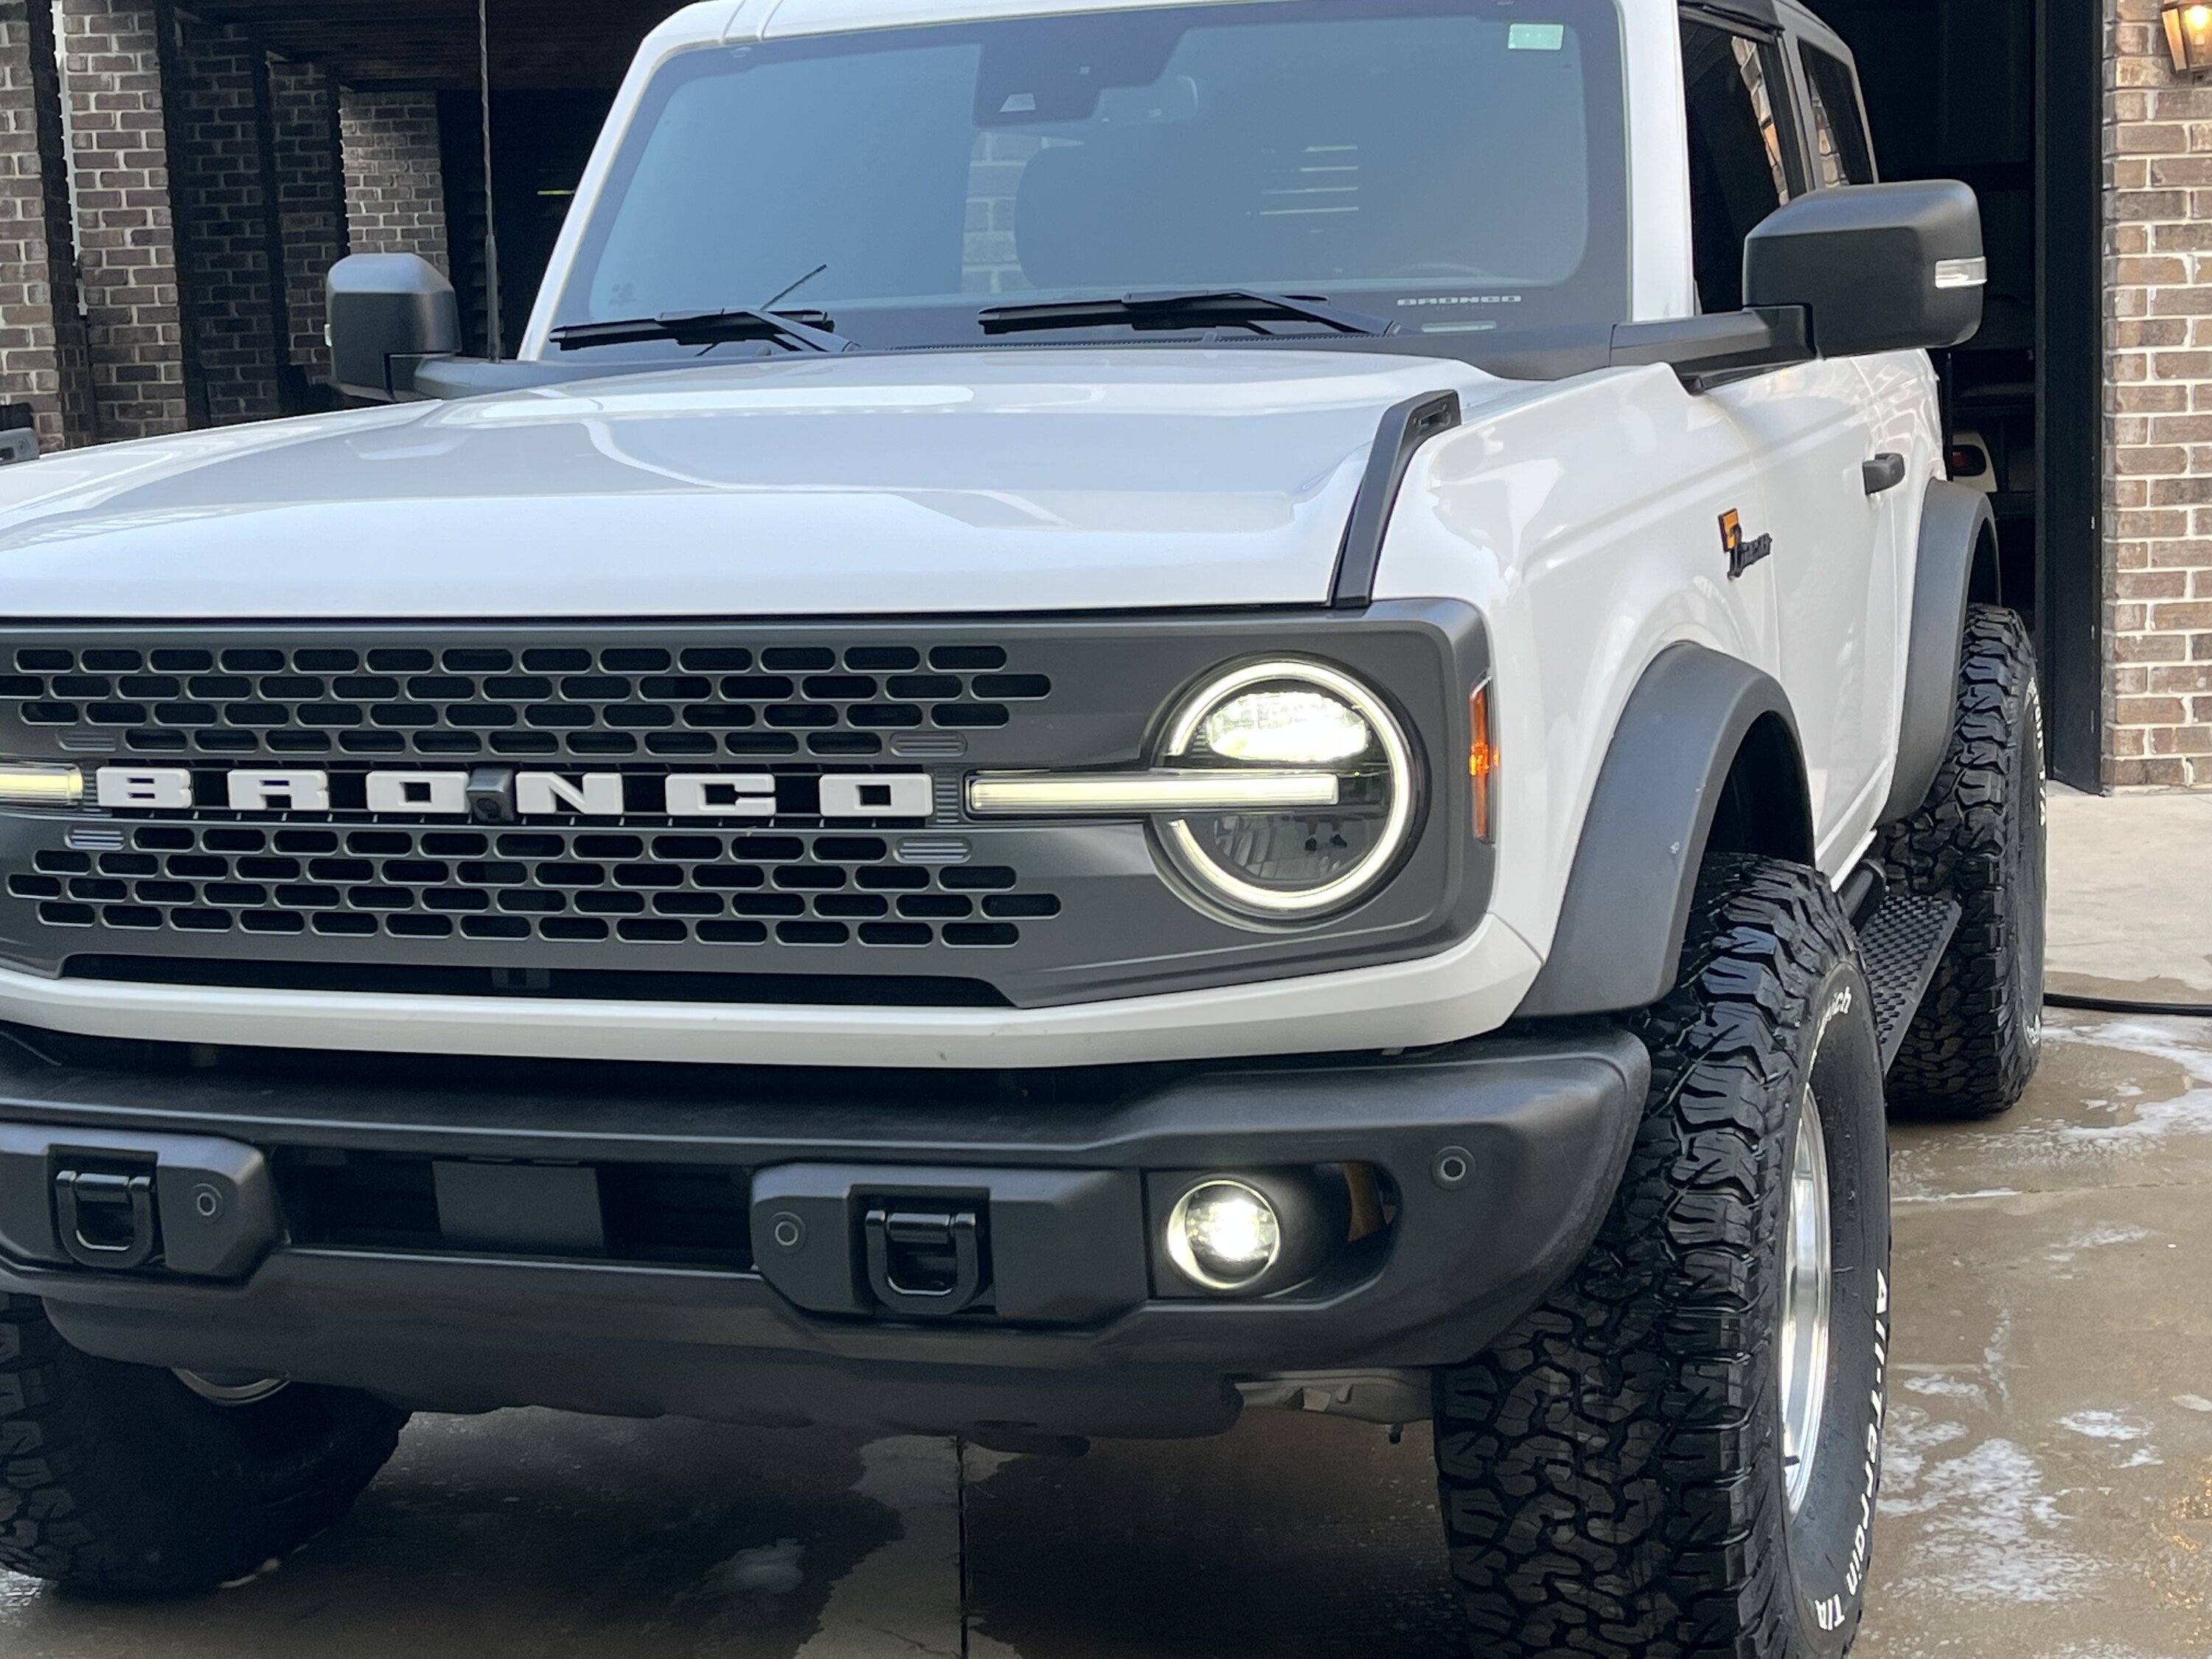 Ford Bronco "Old School" Classic Bronco Looks [Photos Edition] -- post pics of your build! Bronco 5